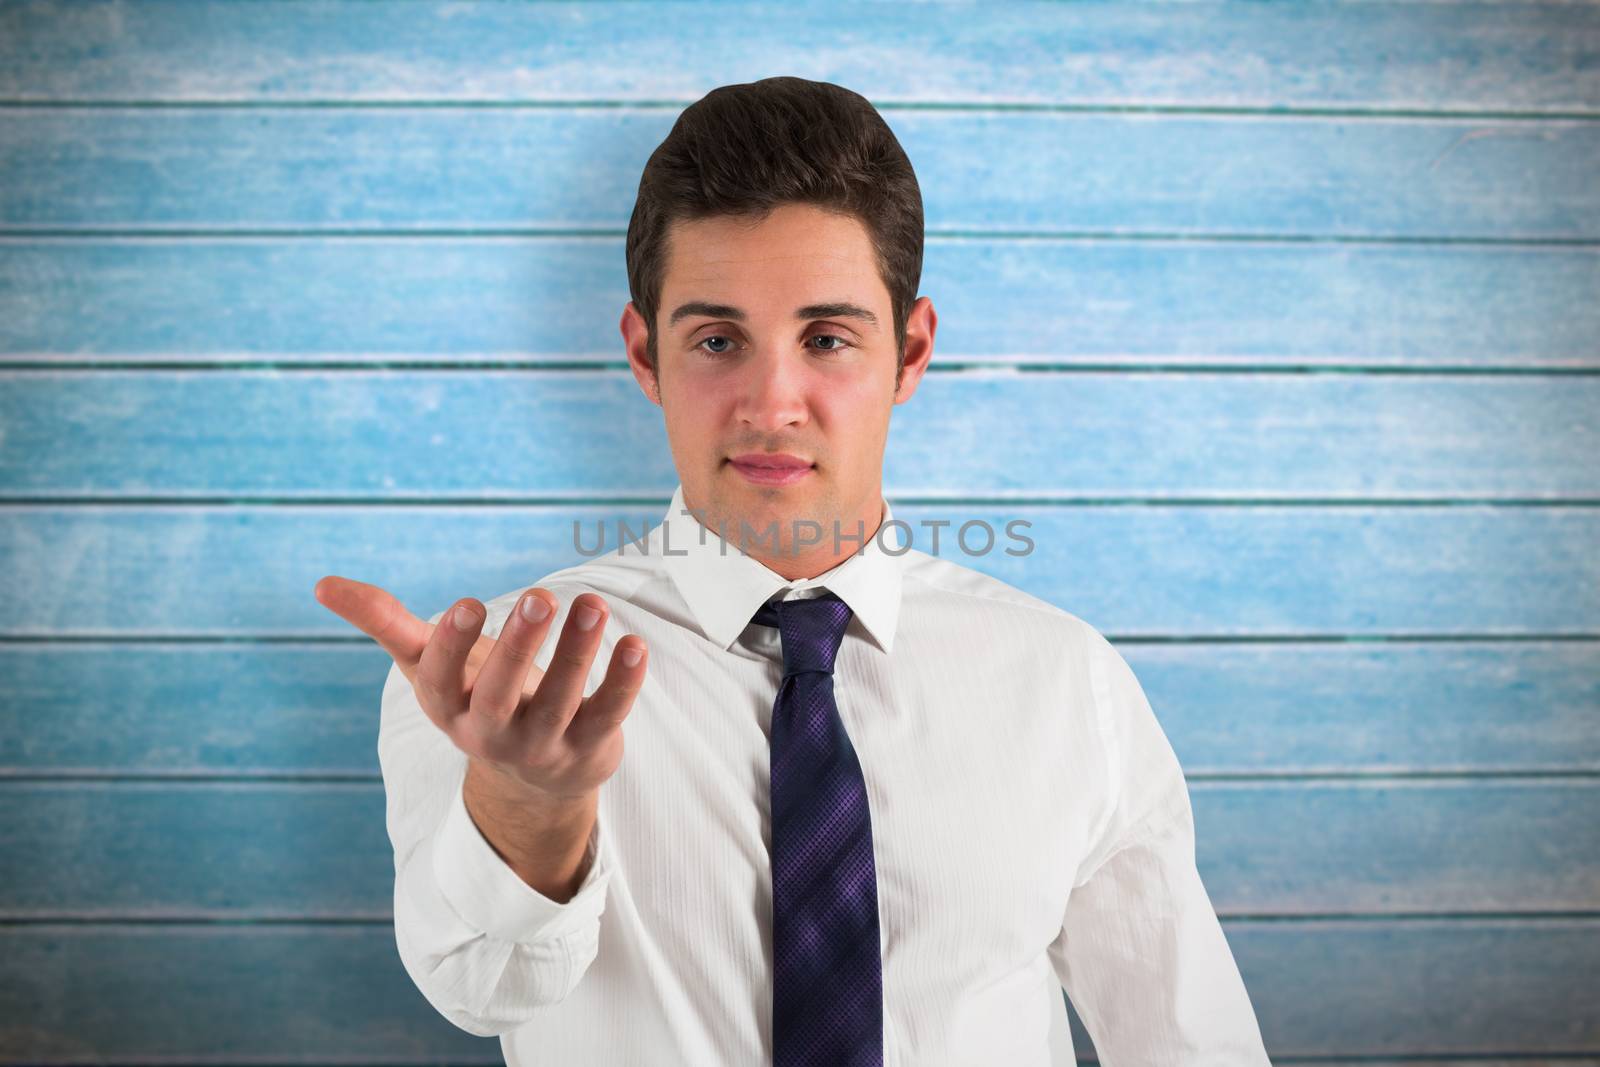 Businessman standing with hand out against wooden planks